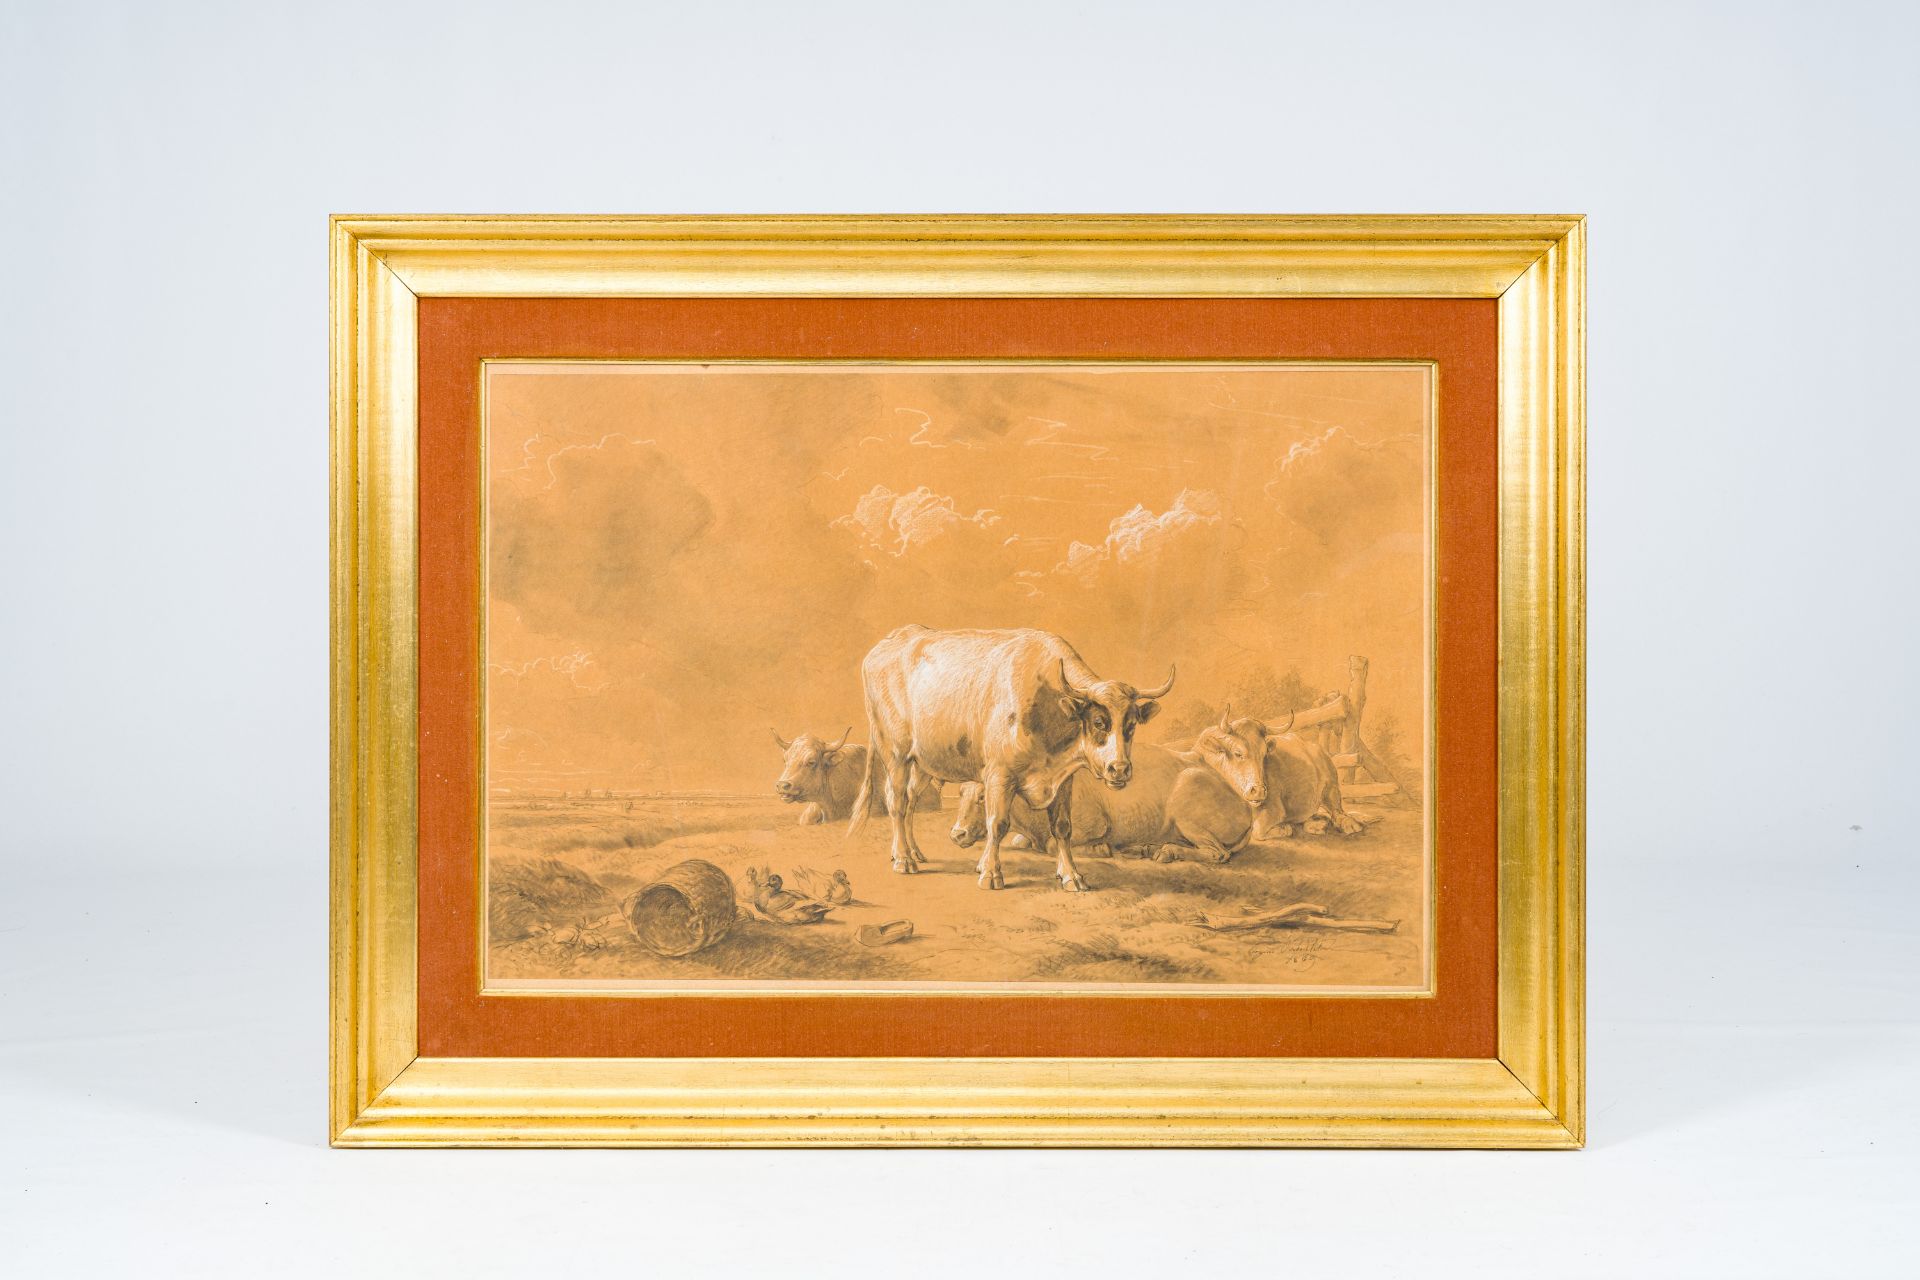 Eugene Verboeckhoven (1798-1881): Cattle in a landscape, mixed media on paper, dated 1869 - Image 2 of 4